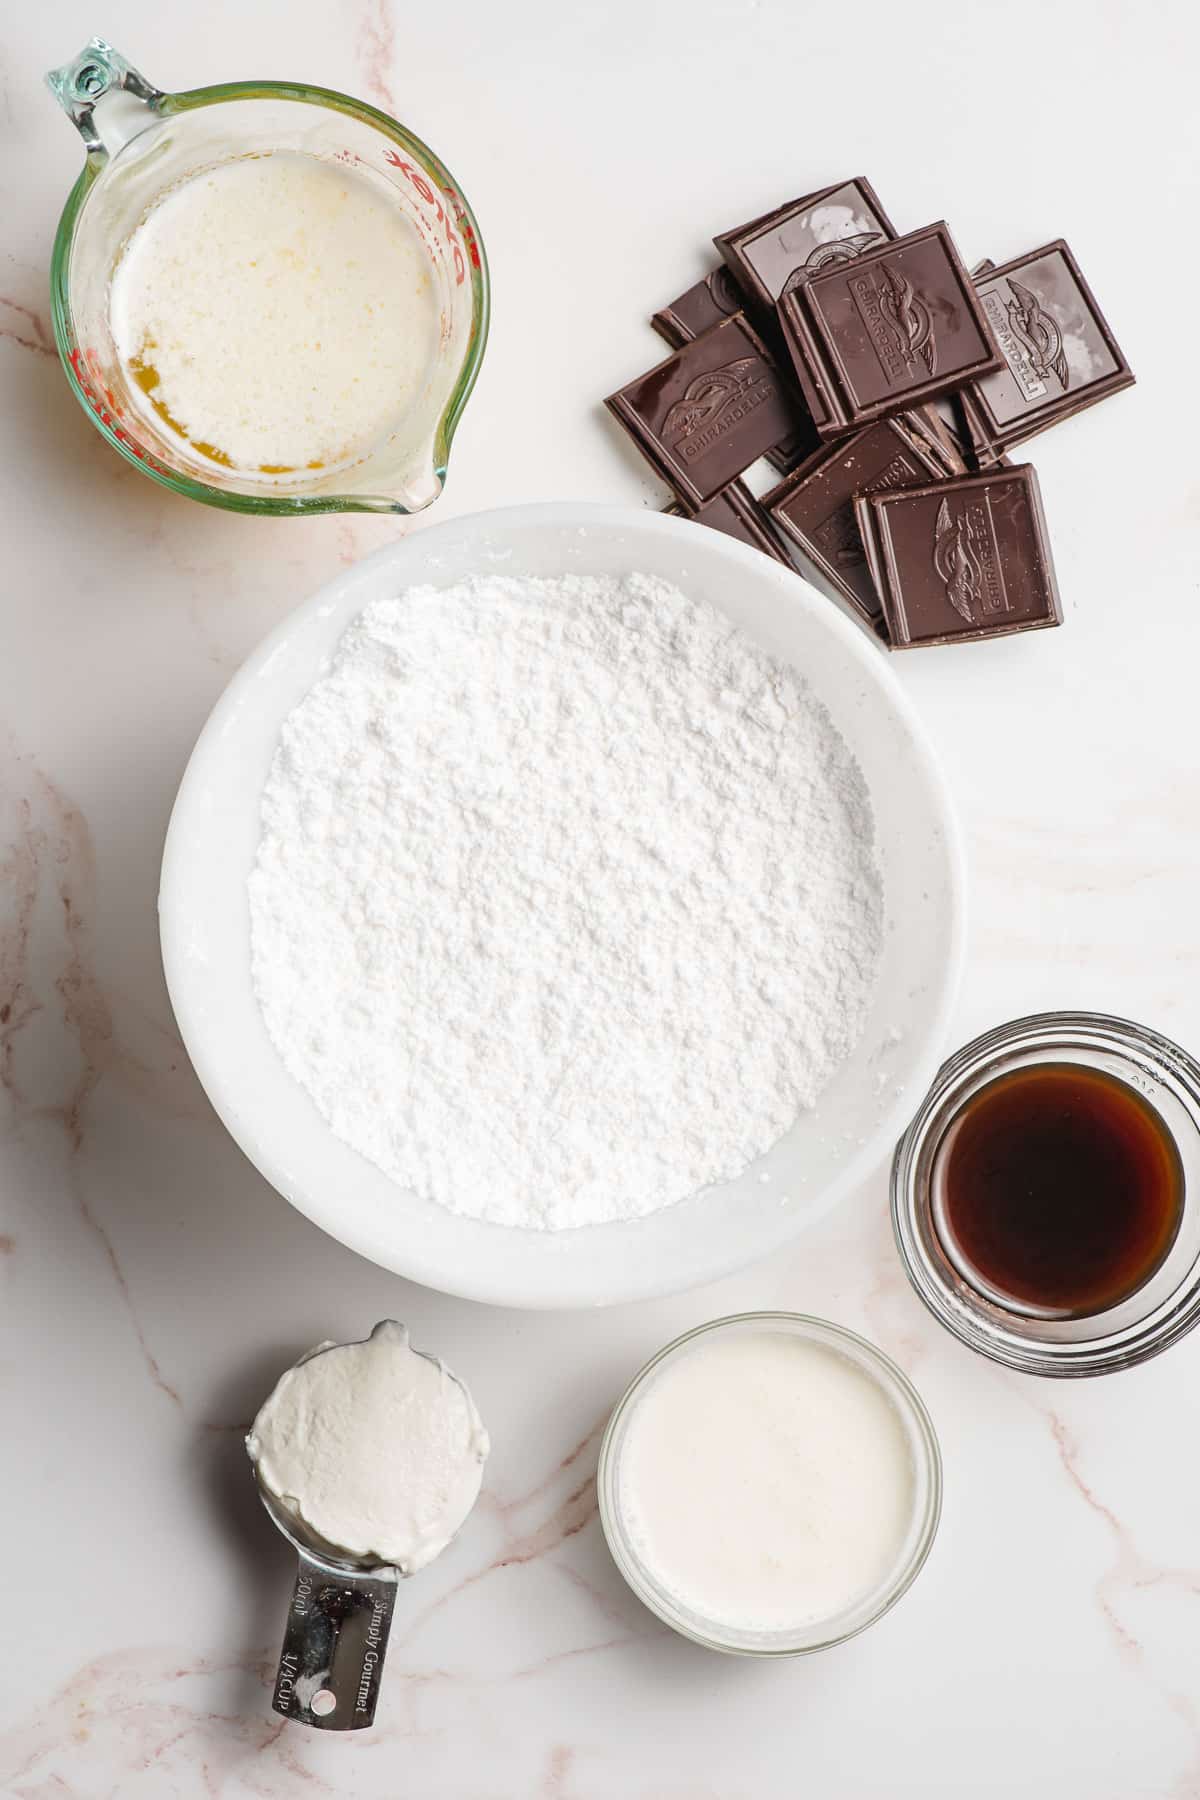 Chocolate sour cream glaze ingredients, shown in prep bowls on a marble background.